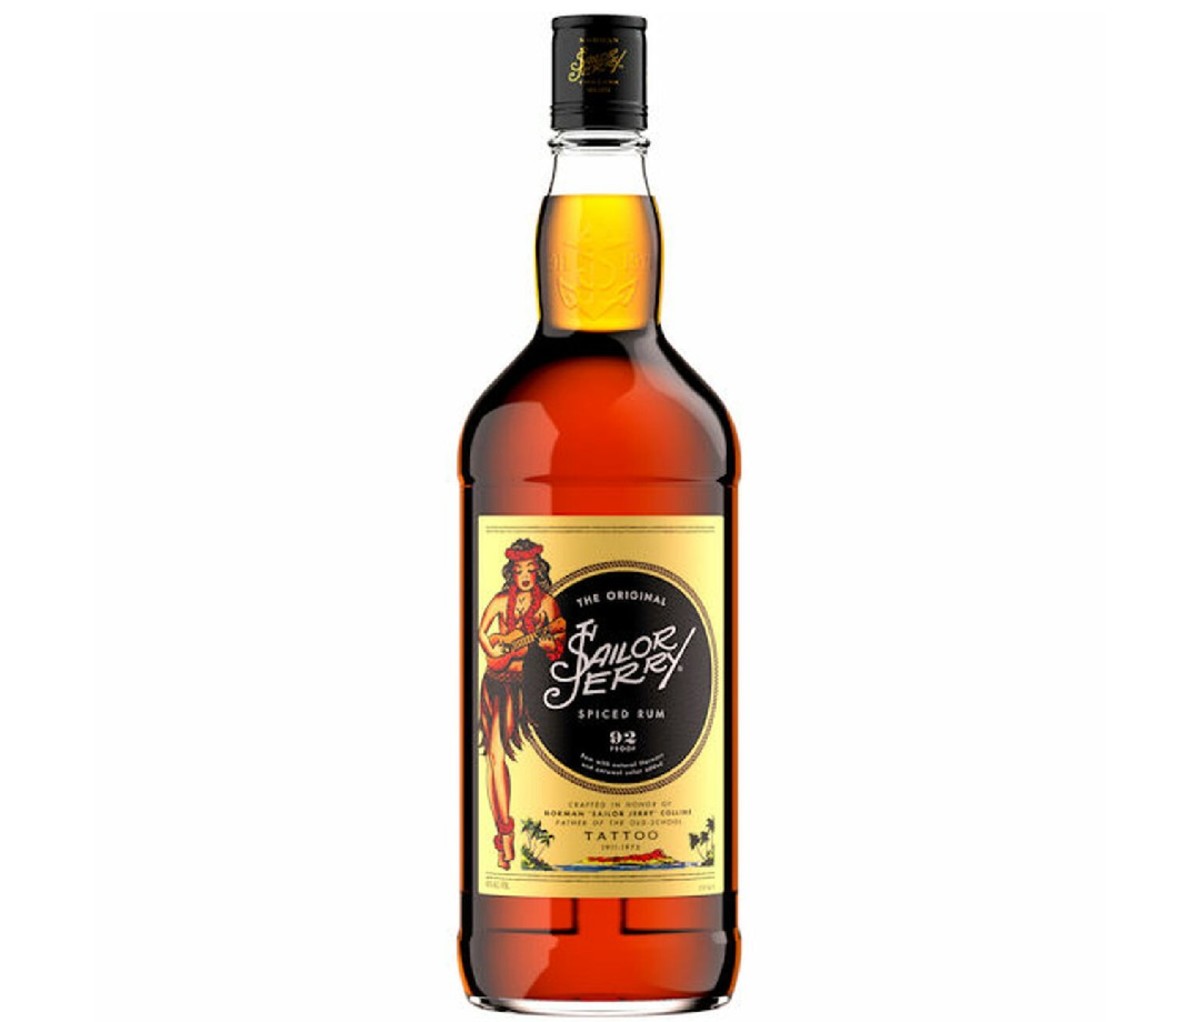 Bottle of Sailor Jerry Spiced Rum